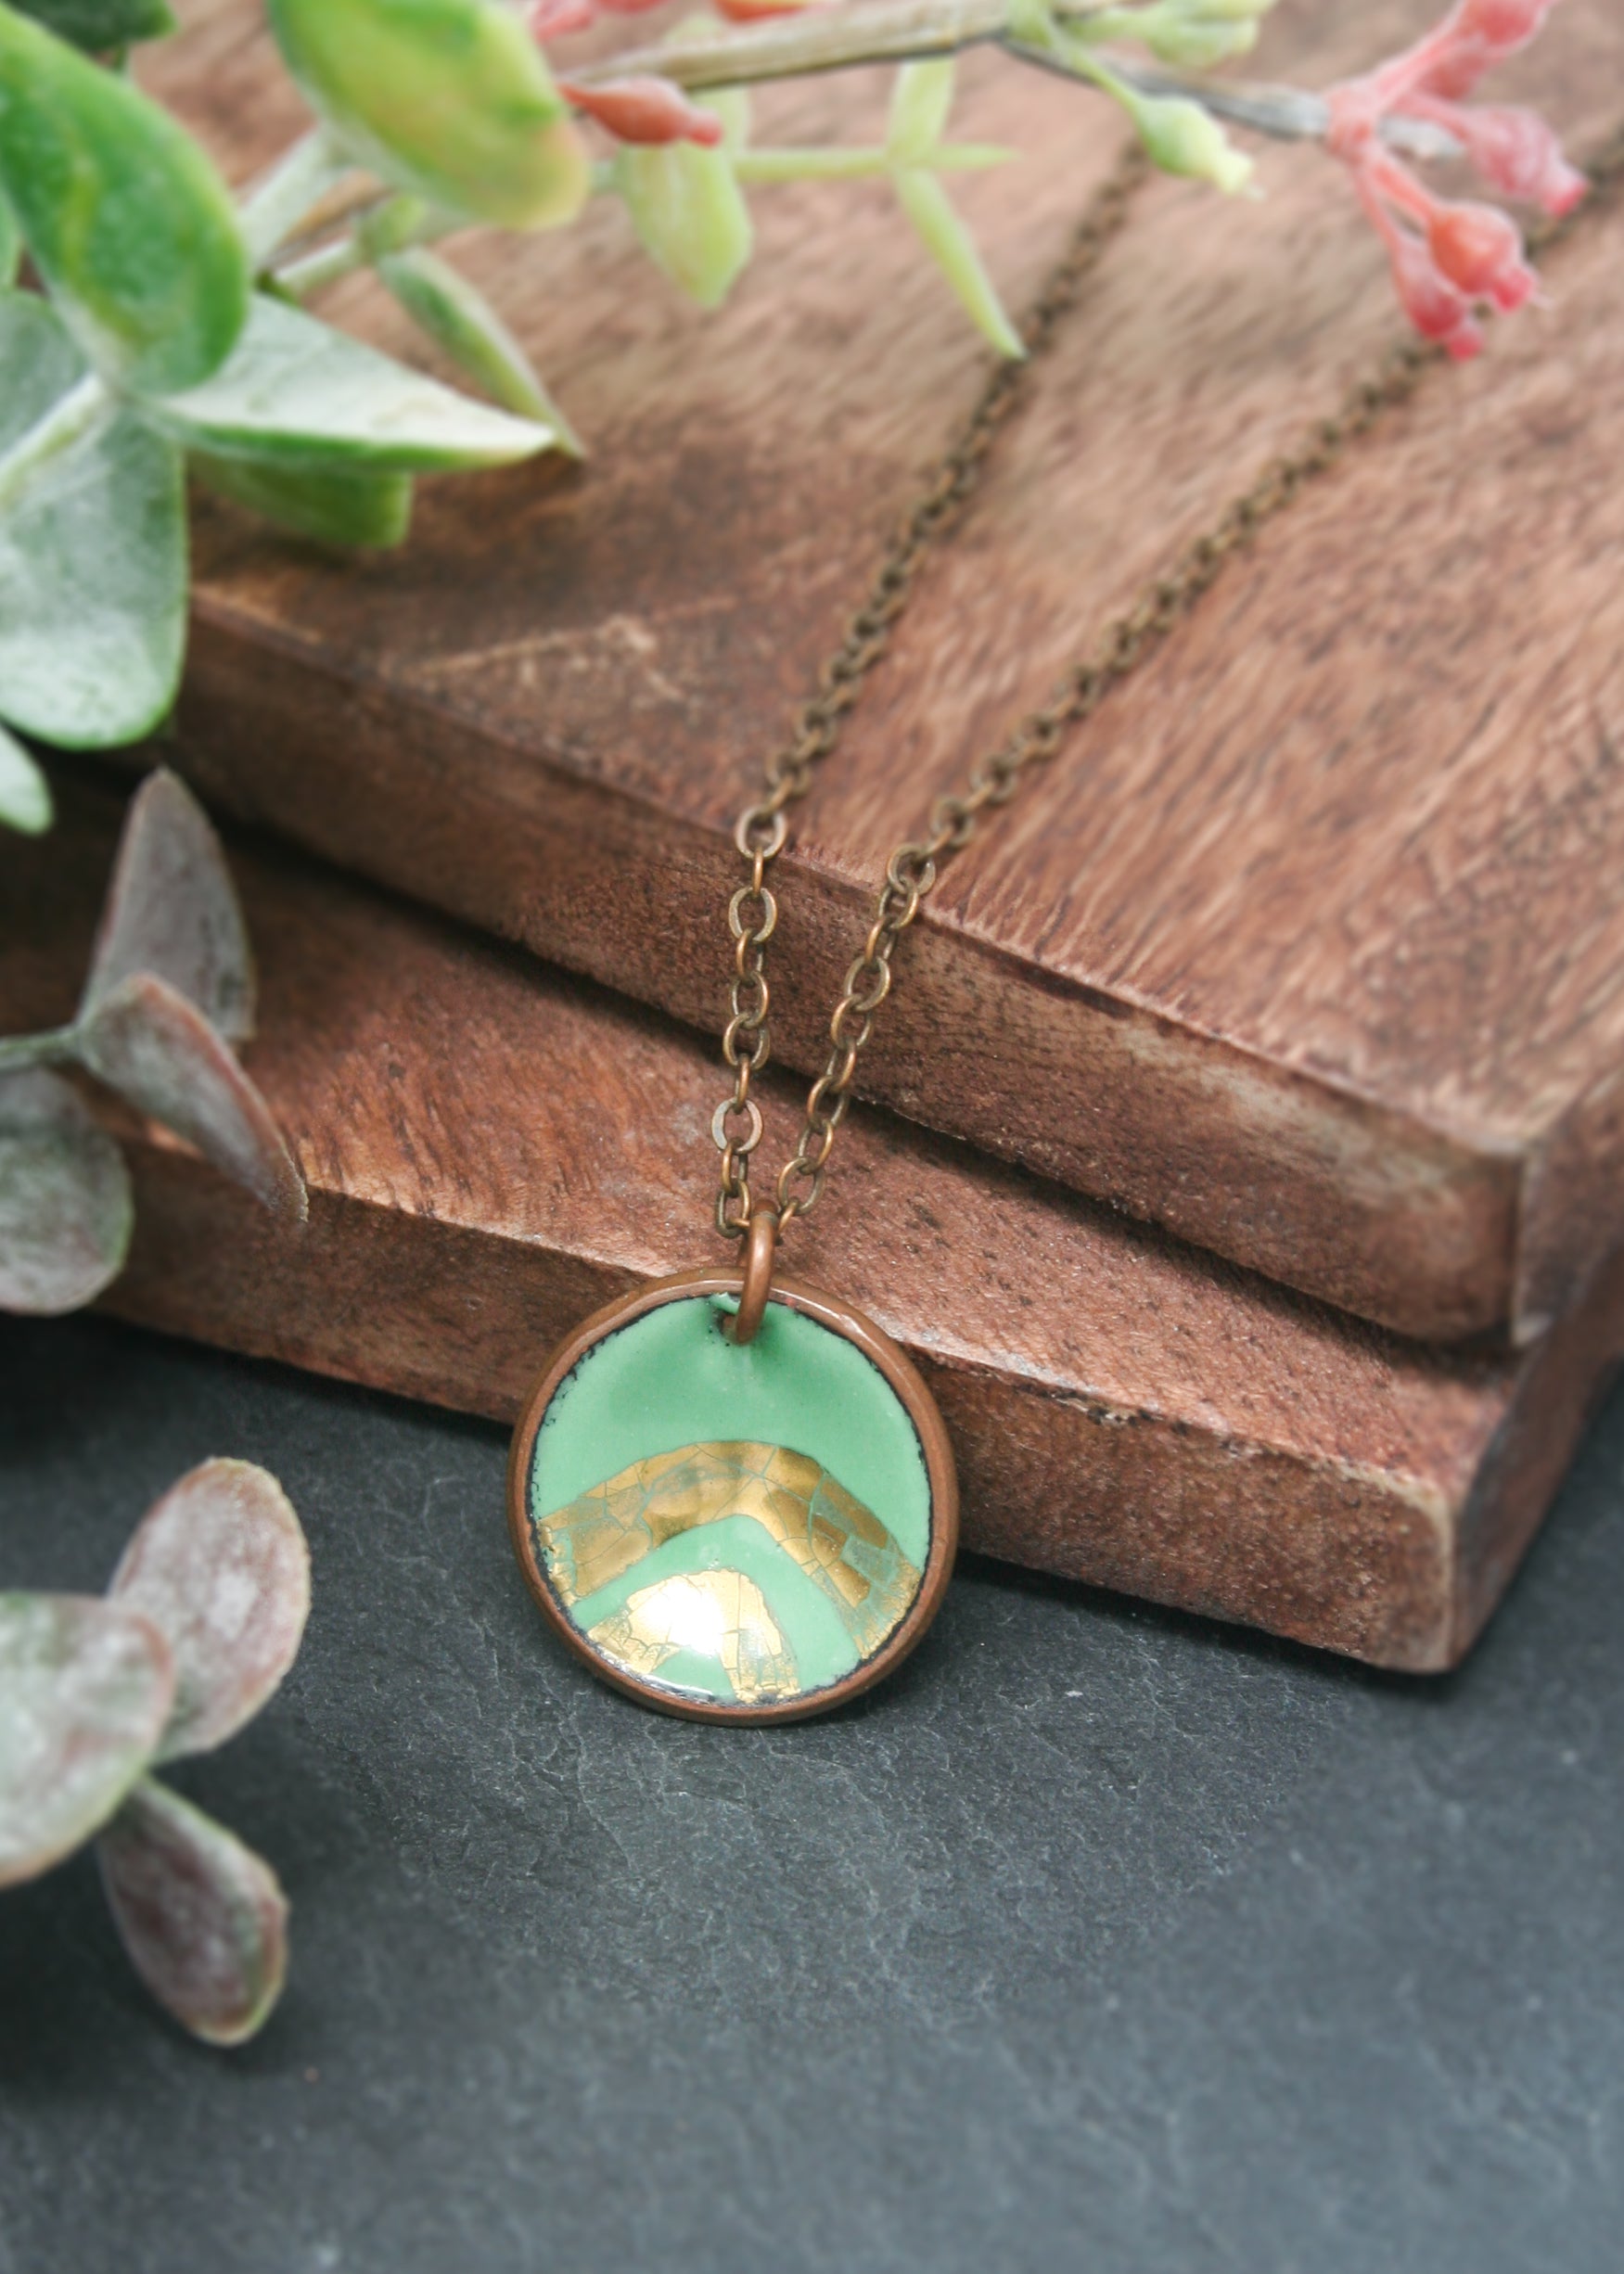 a necklace that has a small green bowl inside of it